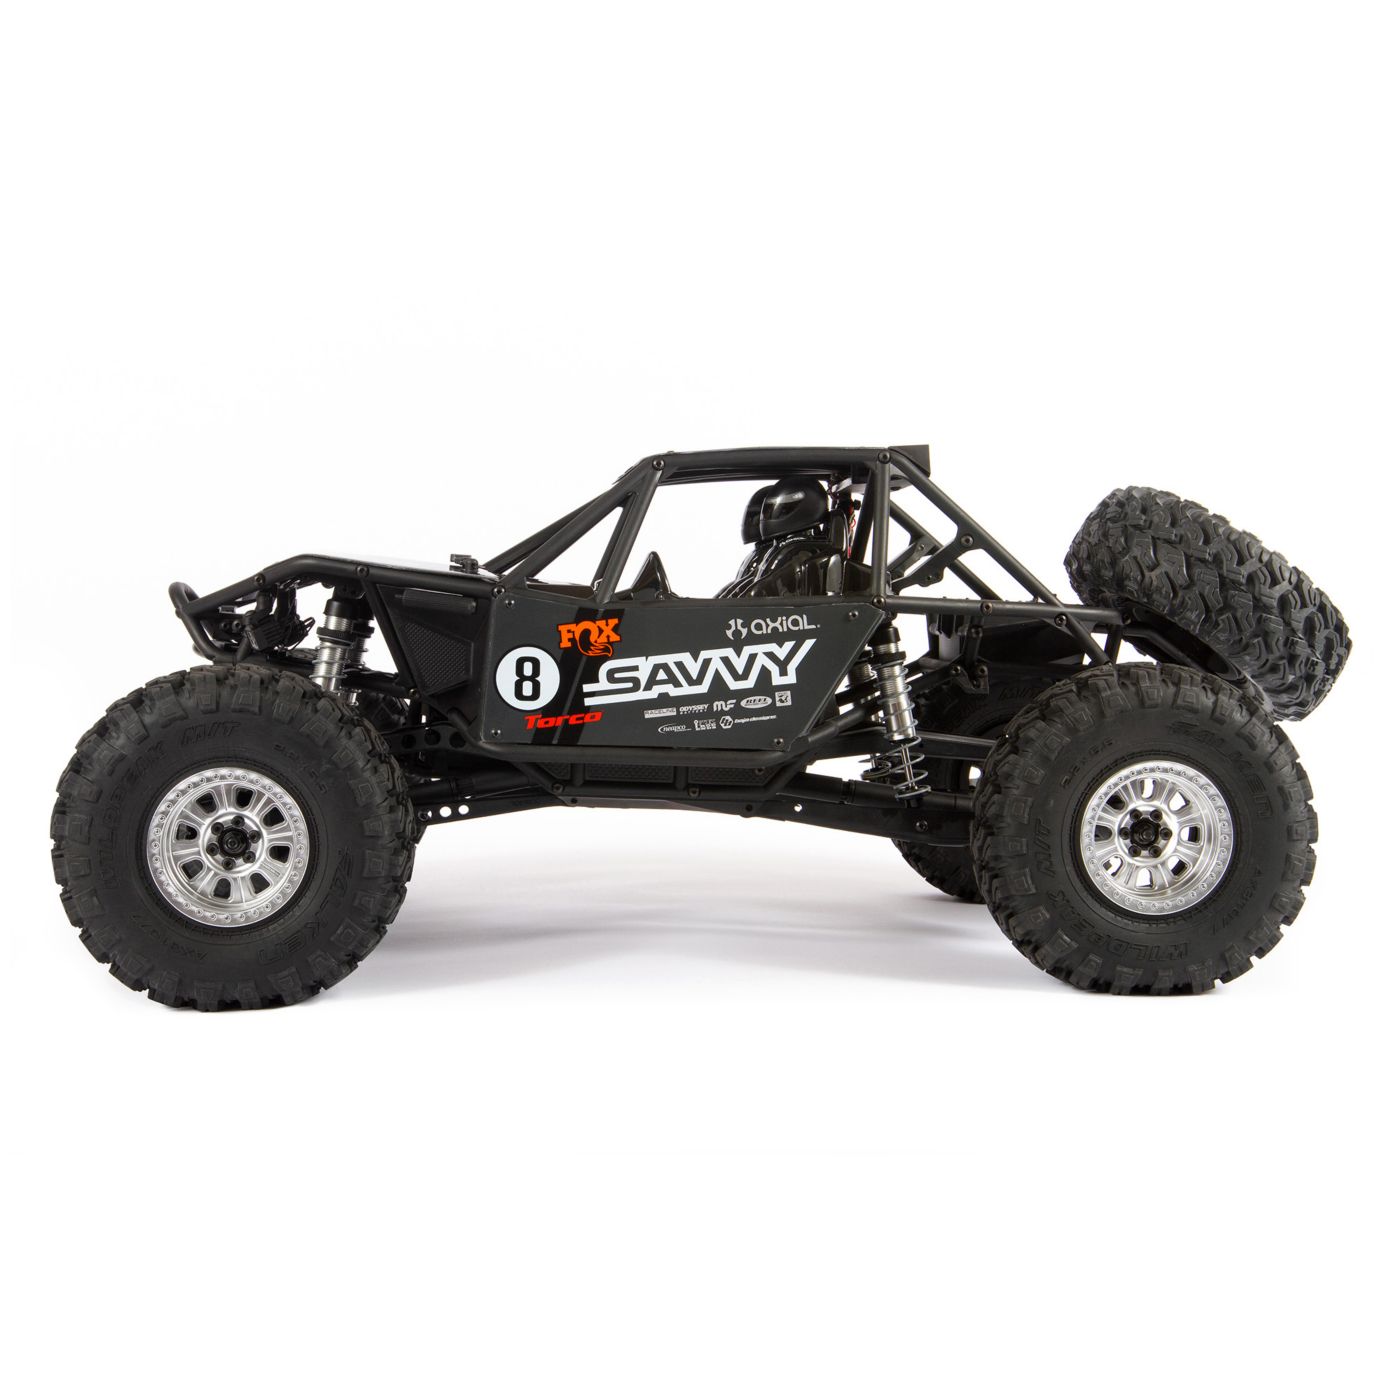 Axial RR10 Bomber 2 - Savvy - Side